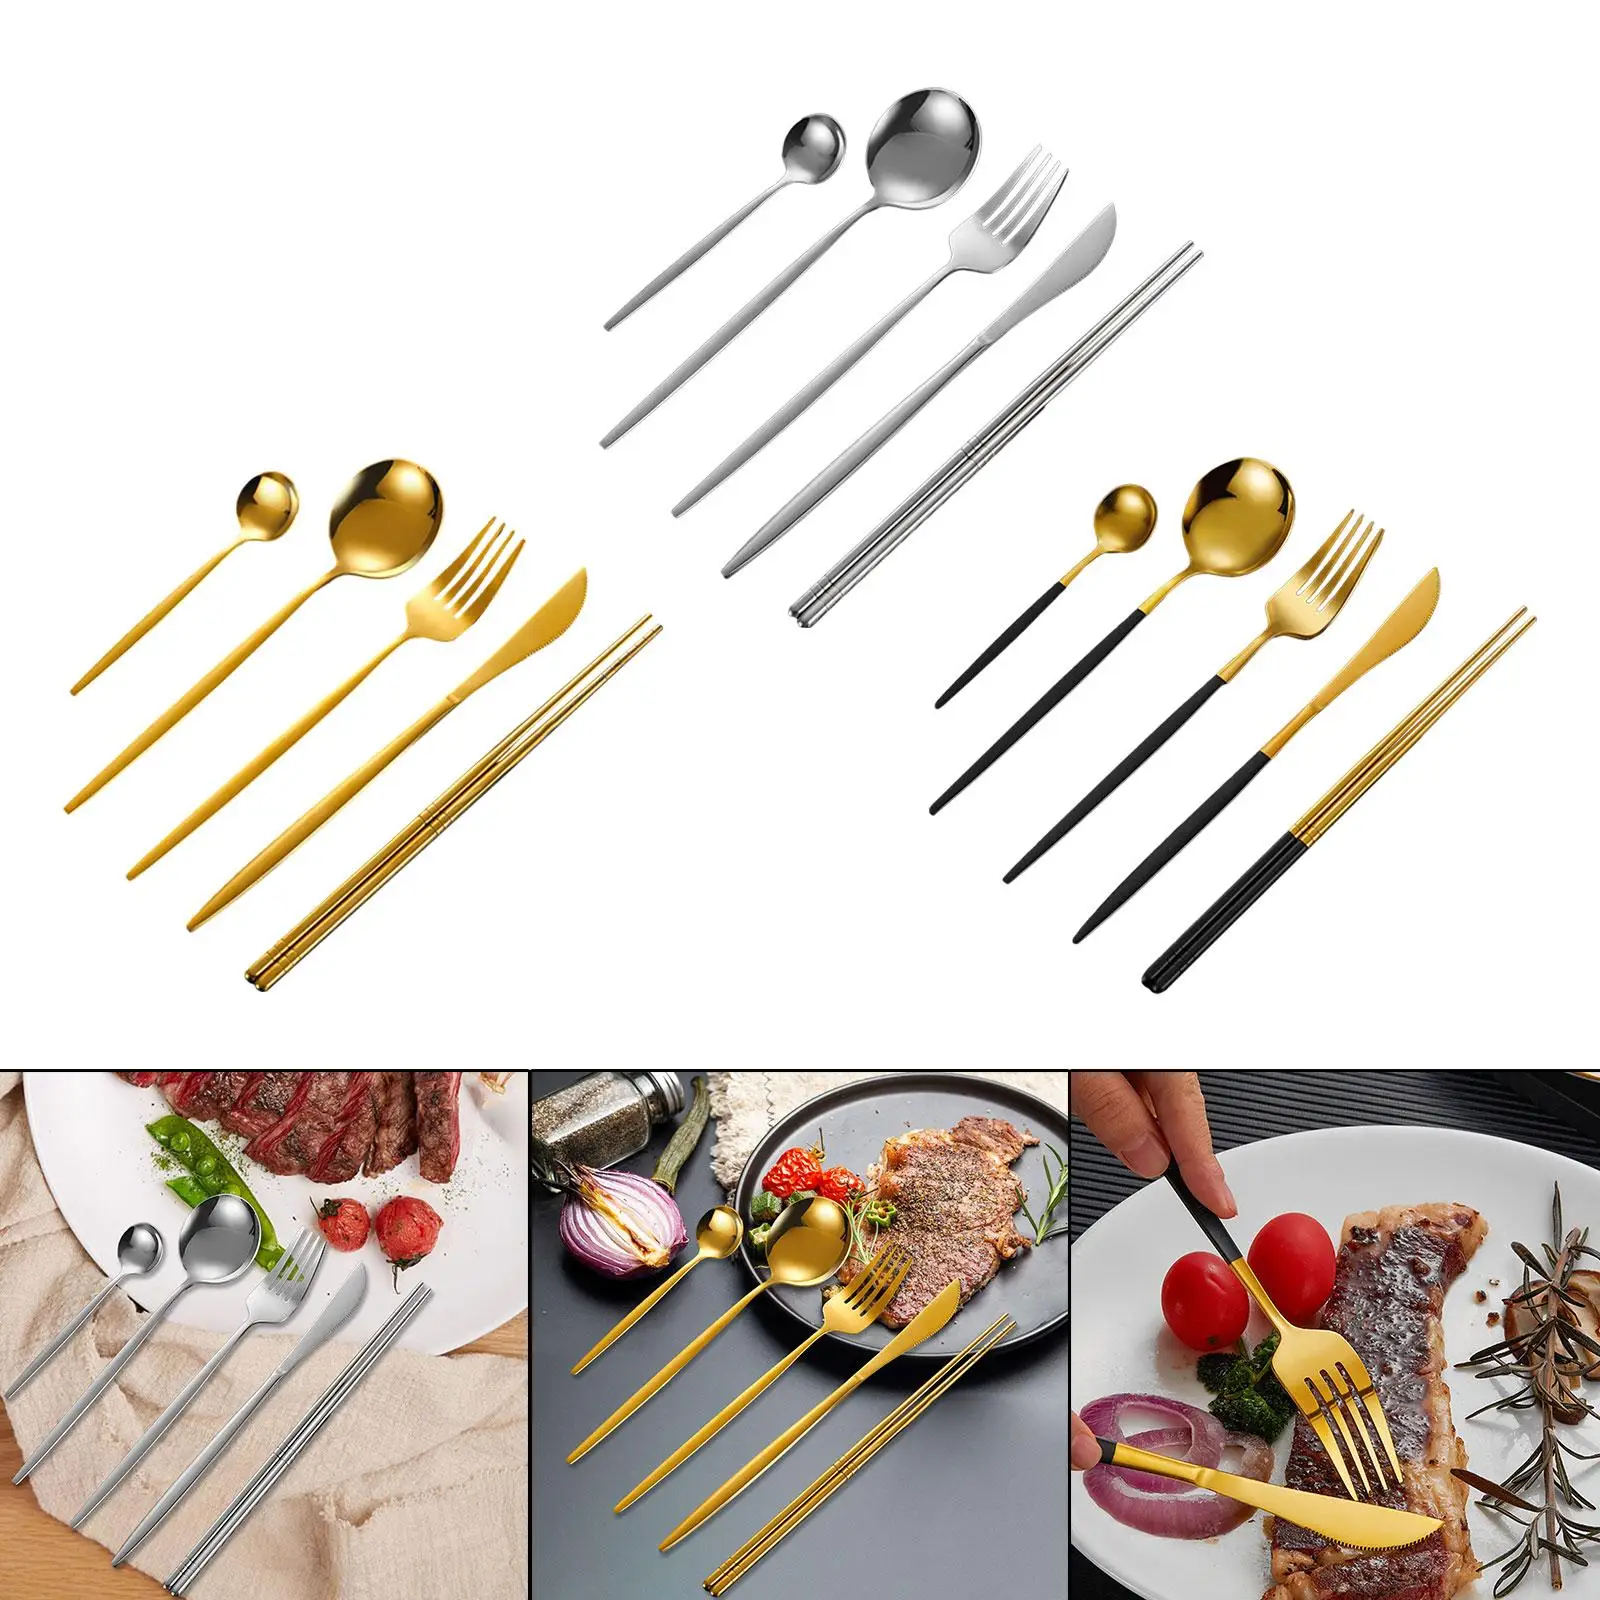 5Pcs Silverware Set Portable Outdoor Tableware Portable Stainless Steel Flatware Set for Barbecue Home Kitchen Travel Picnic